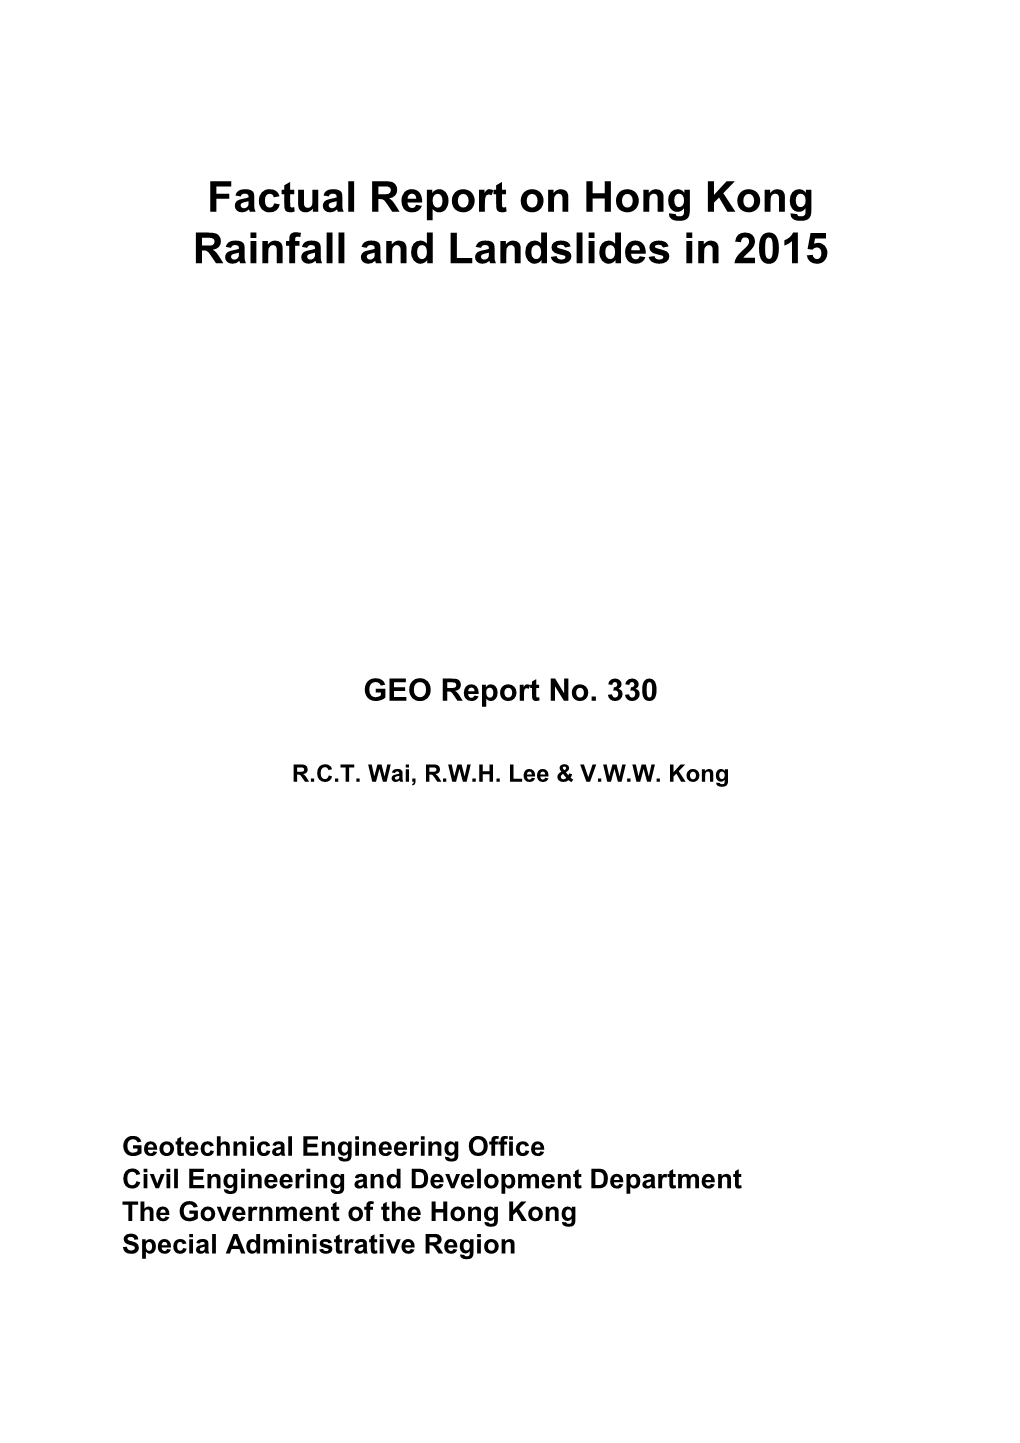 Factual Report on Hong Kong Rainfall and Landslides in 2015